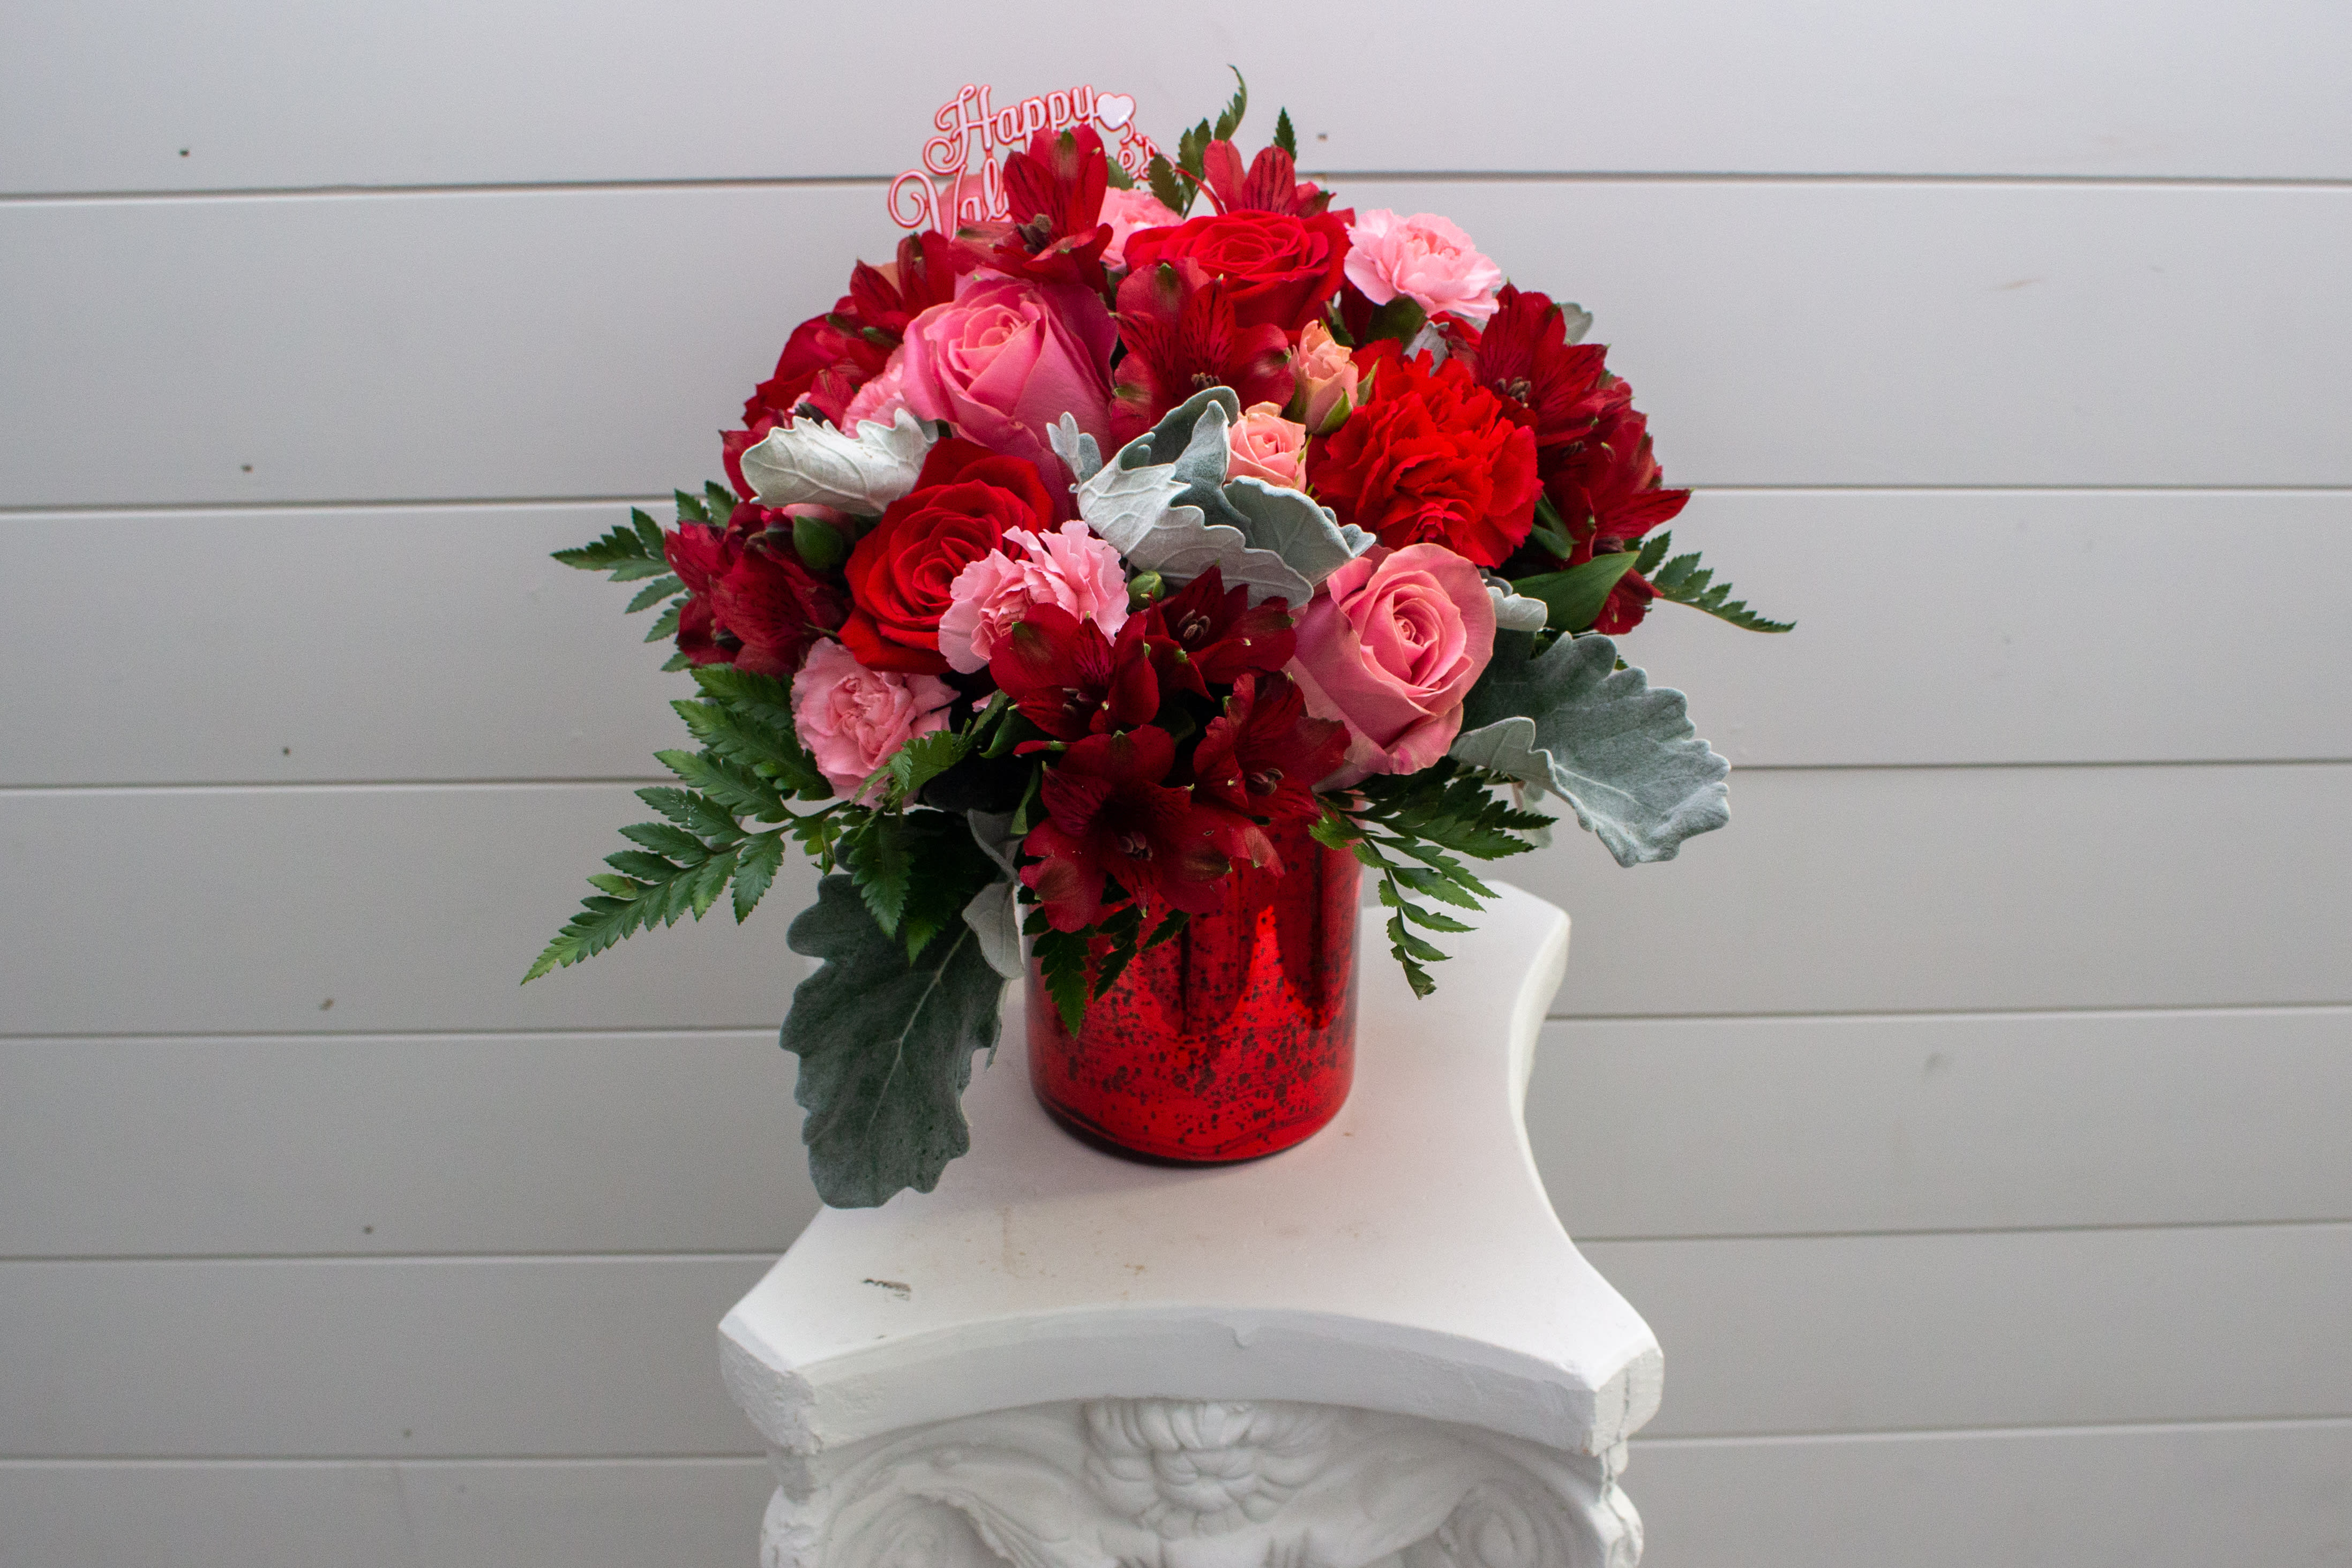 Ruby Rose Valentines  - The Ruby Rose Valentine is a Forevermore farm Floral original design. The shorter ruby rose vase is filled to value with dusty miller, carnations, roses, and greenery! Perfect for a sweet and elegant way to say I love you!